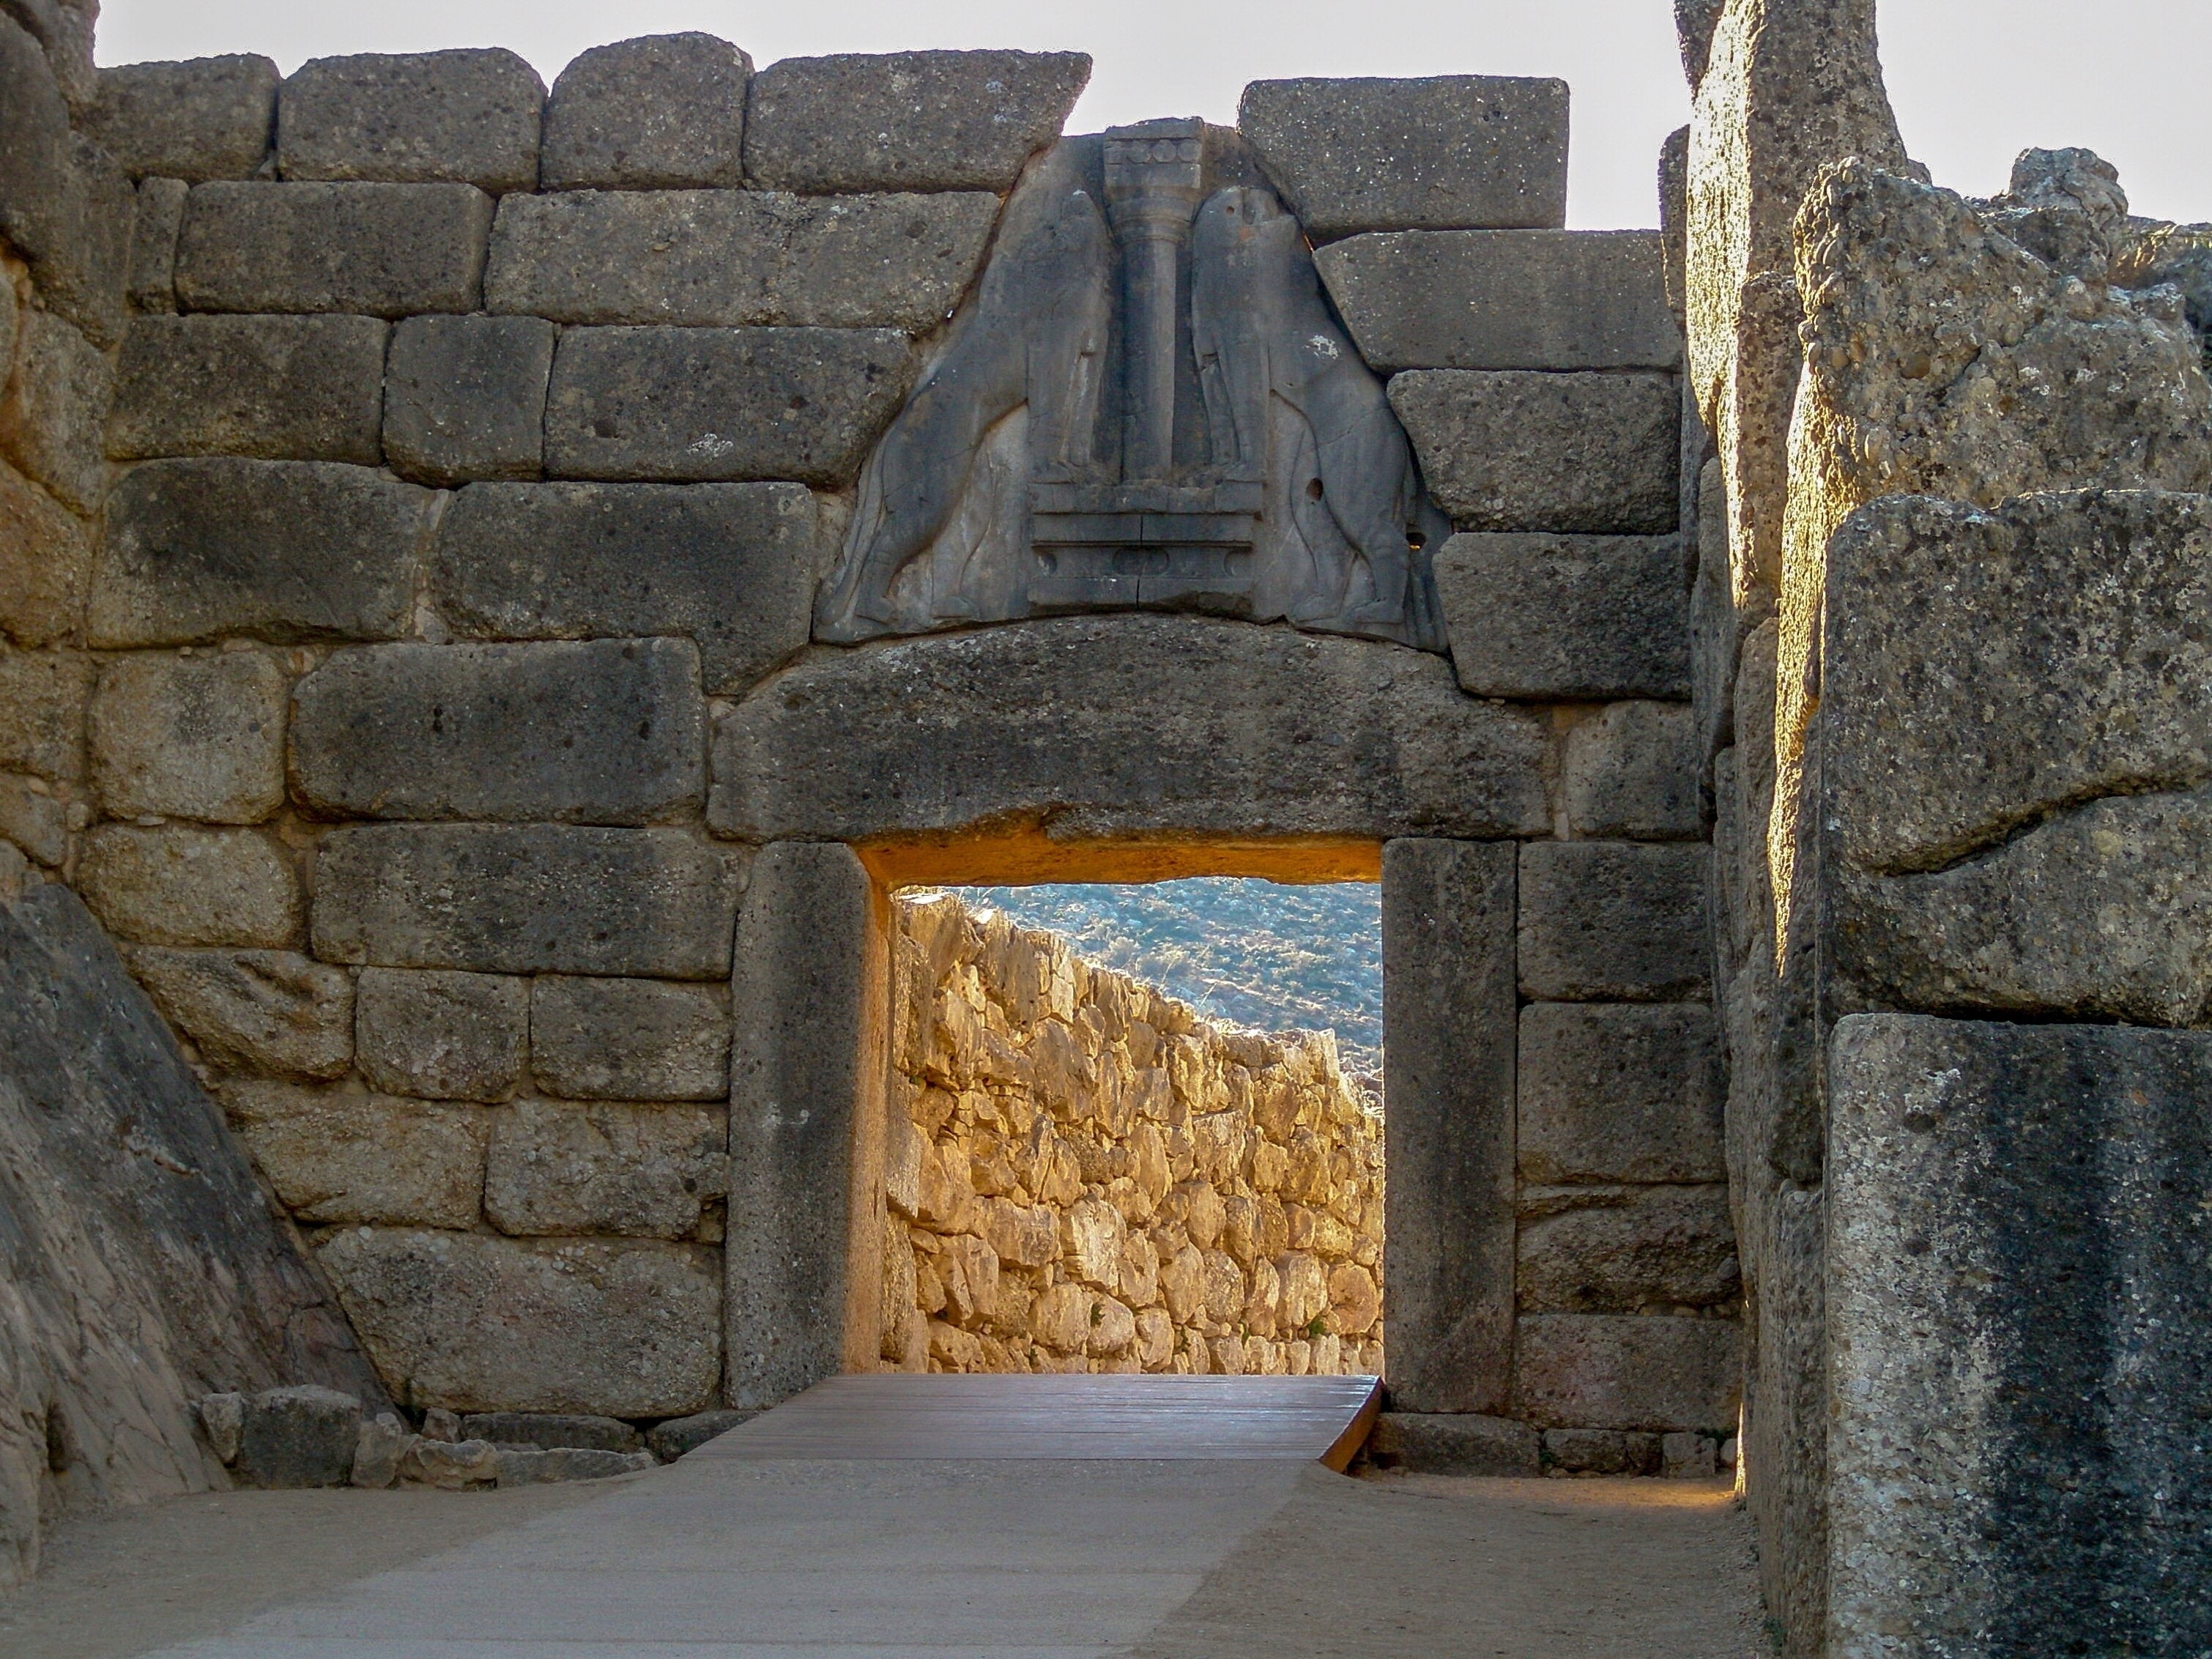 The Lion Gate @ Mycenae, Greece (Sep 2006): erected in the 13th century BC, this was the entrance to the Mycenaean Citadel.